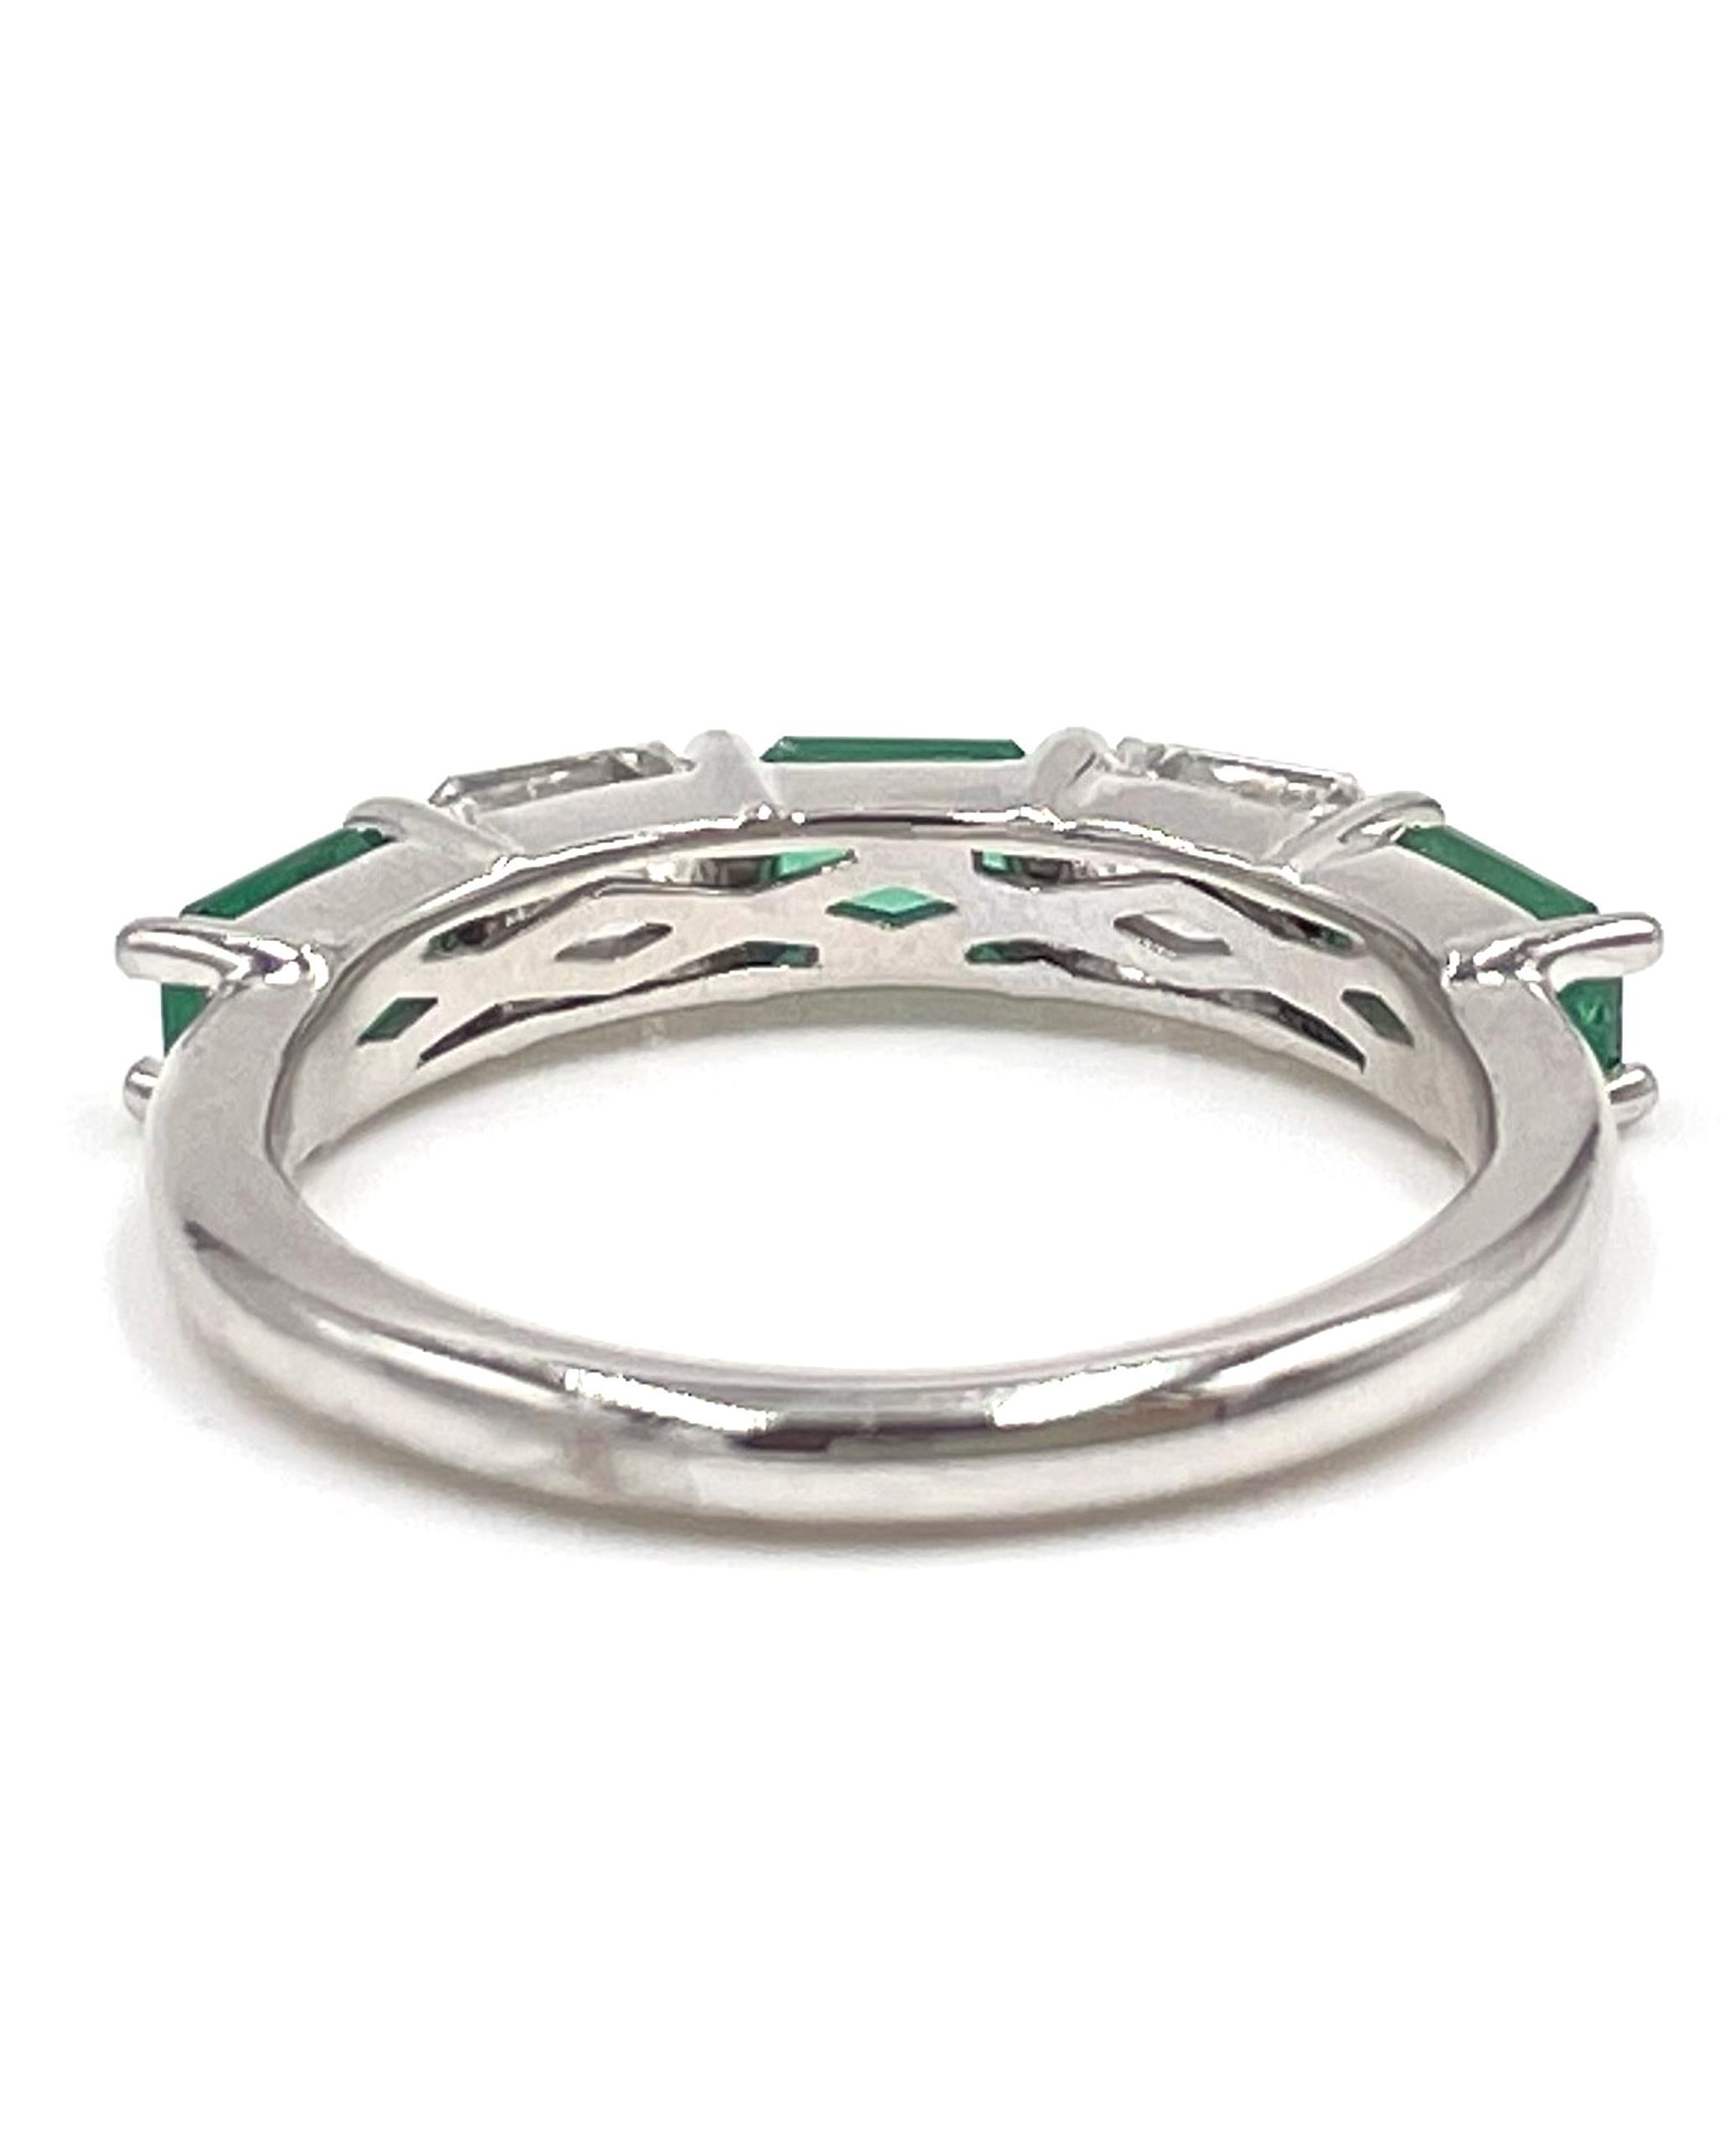 Women's 14K White Gold Emerald and Diamond Ring For Sale